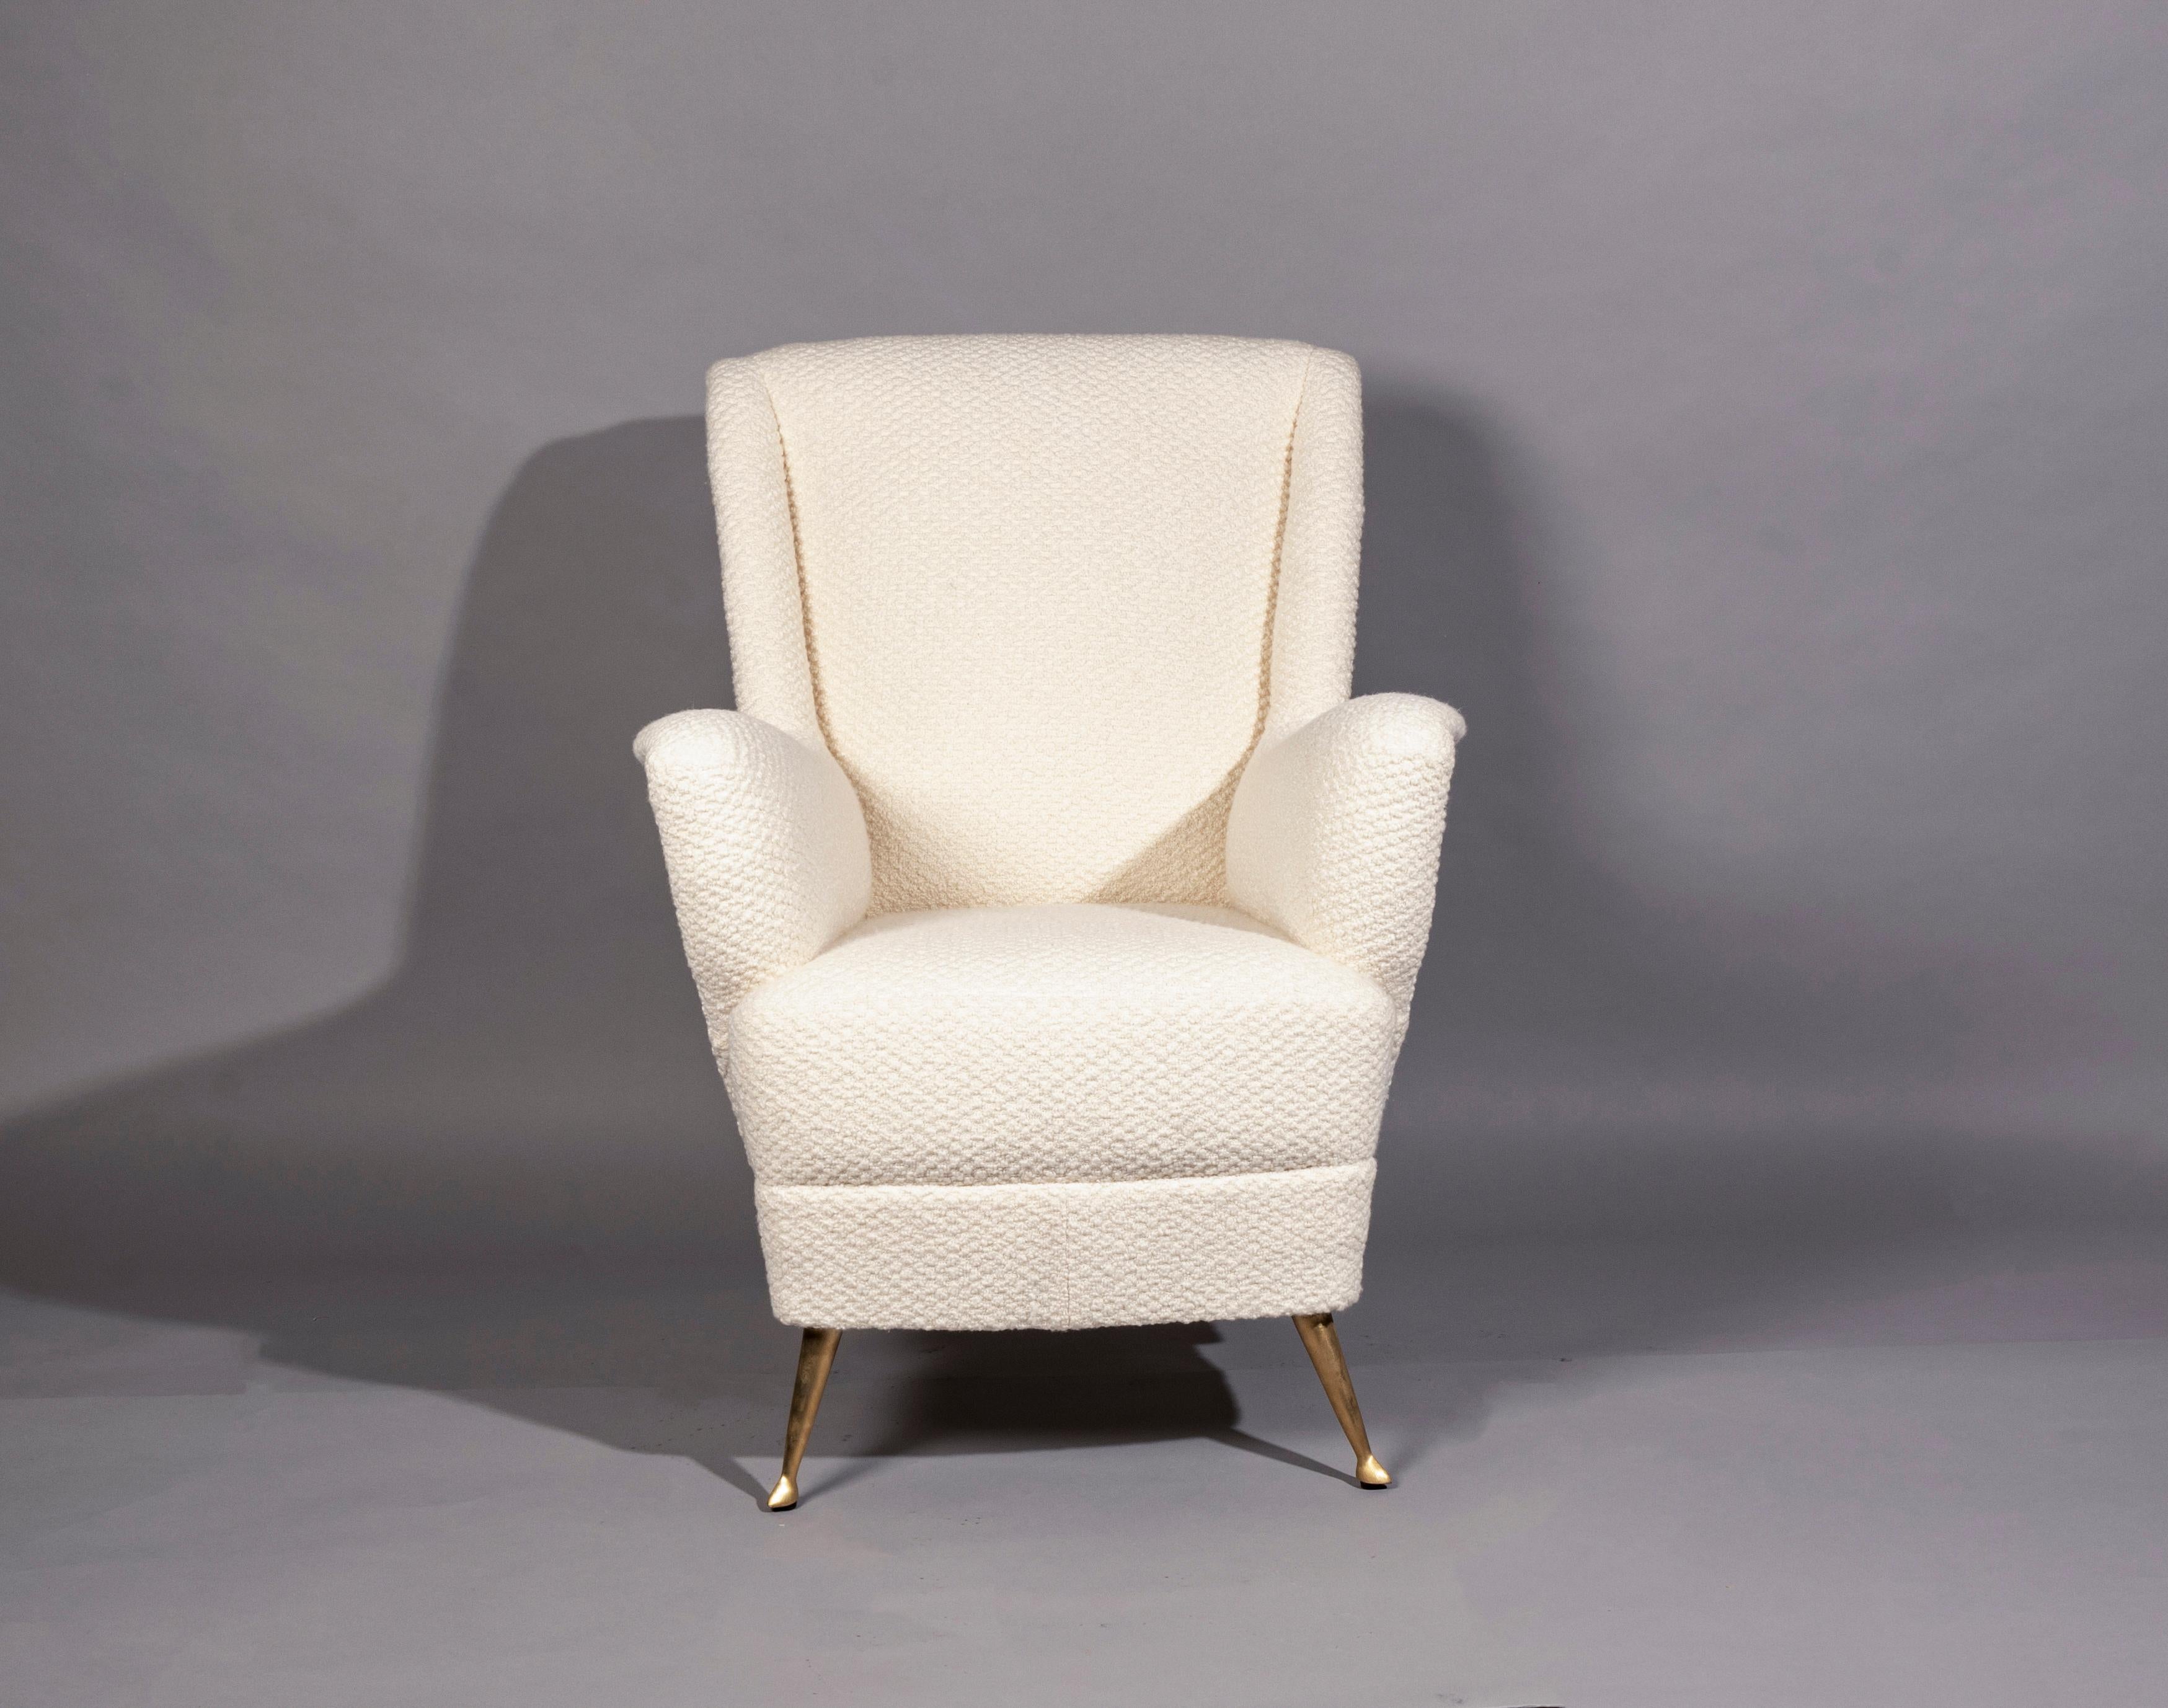 Beautiful and very comfortable Armchair produced in Italy by ISA Bergamo in the 1950s.
Restored and reupholstered with a Holland&Sherry wool boucle', legs in brass.